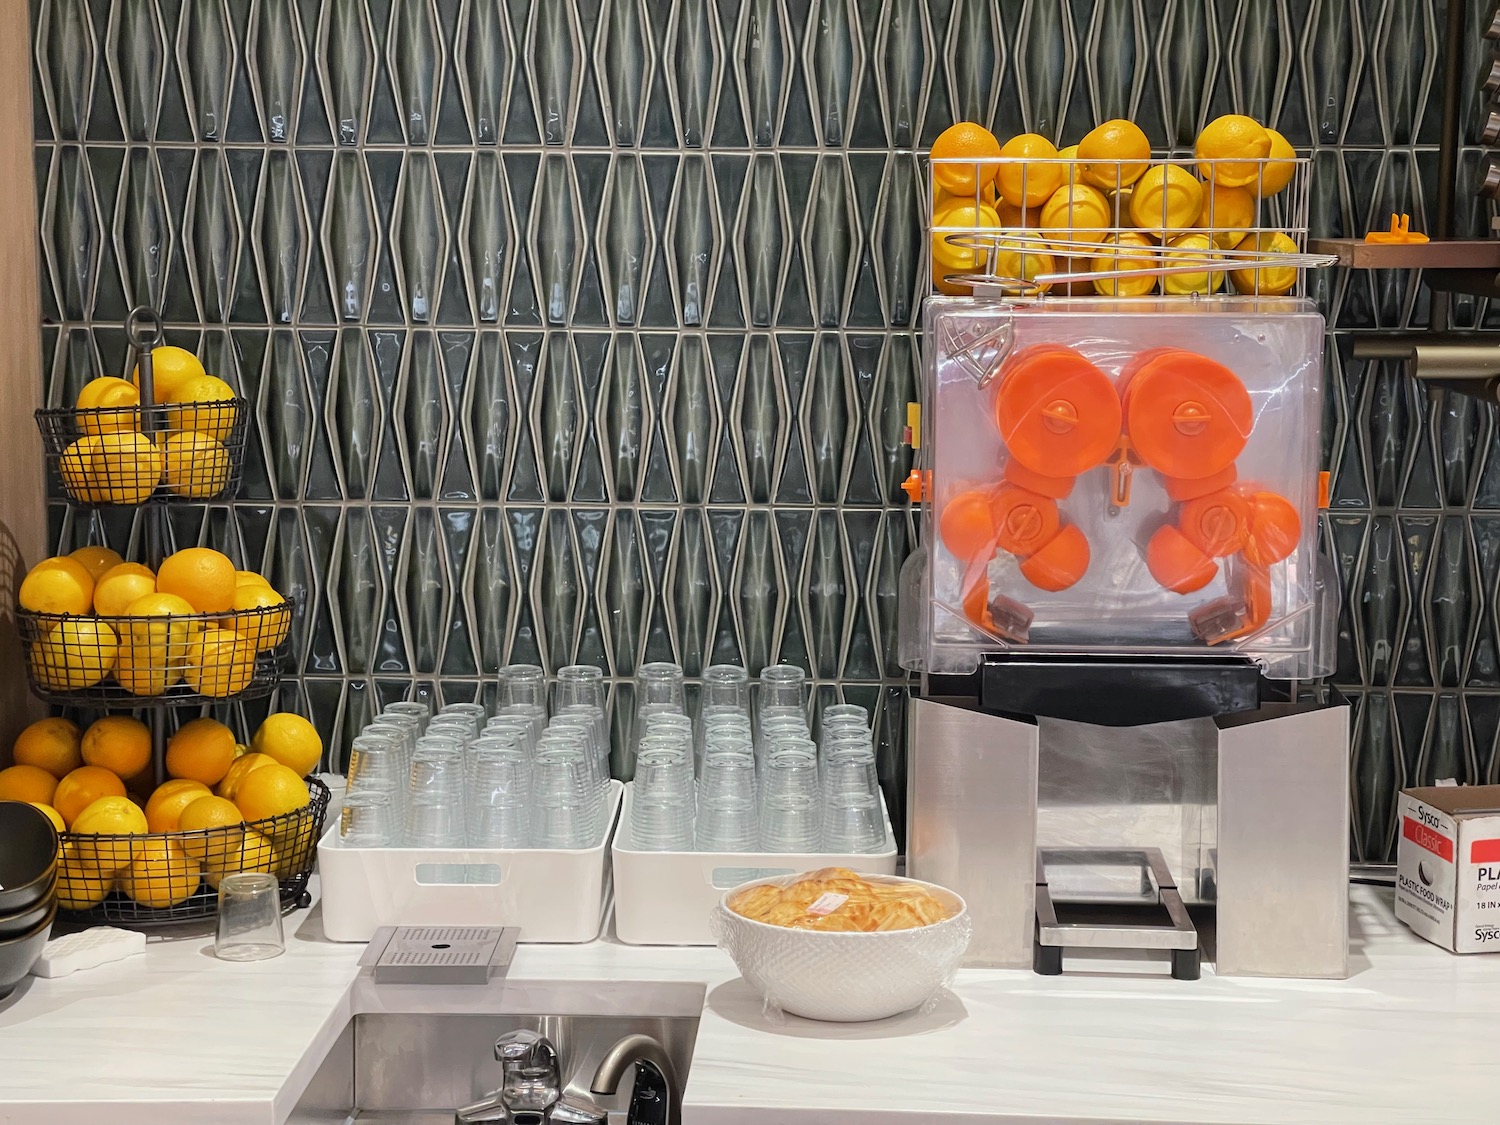 a juice machine with oranges and bottles